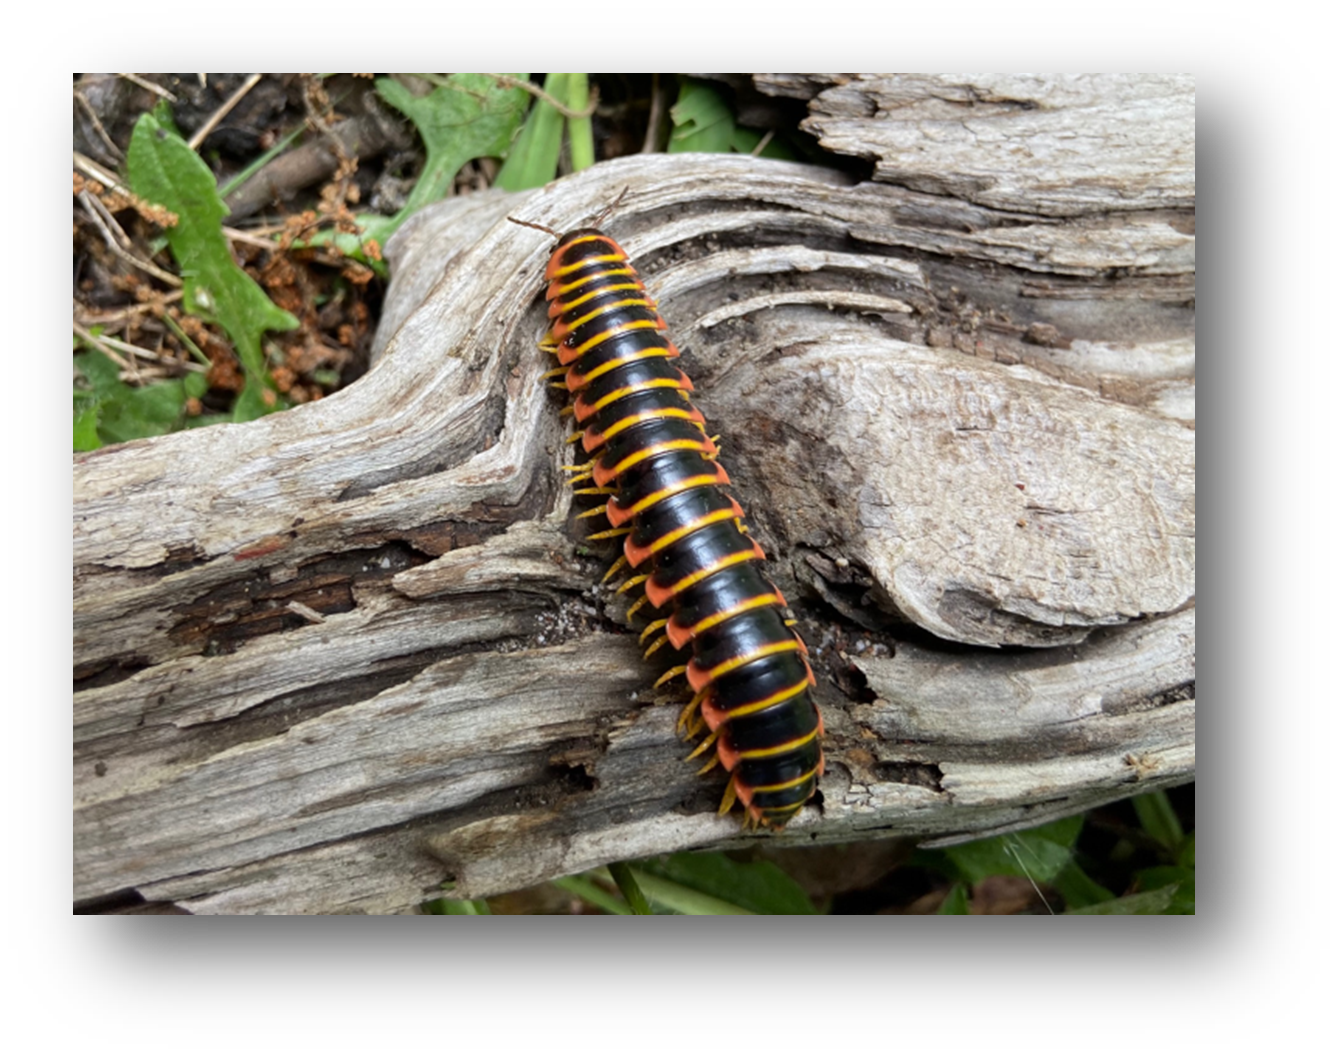 Cherry millipede_ George Washington National Forest near Fort Valley_ VA. Photograph by Stephen Wendt